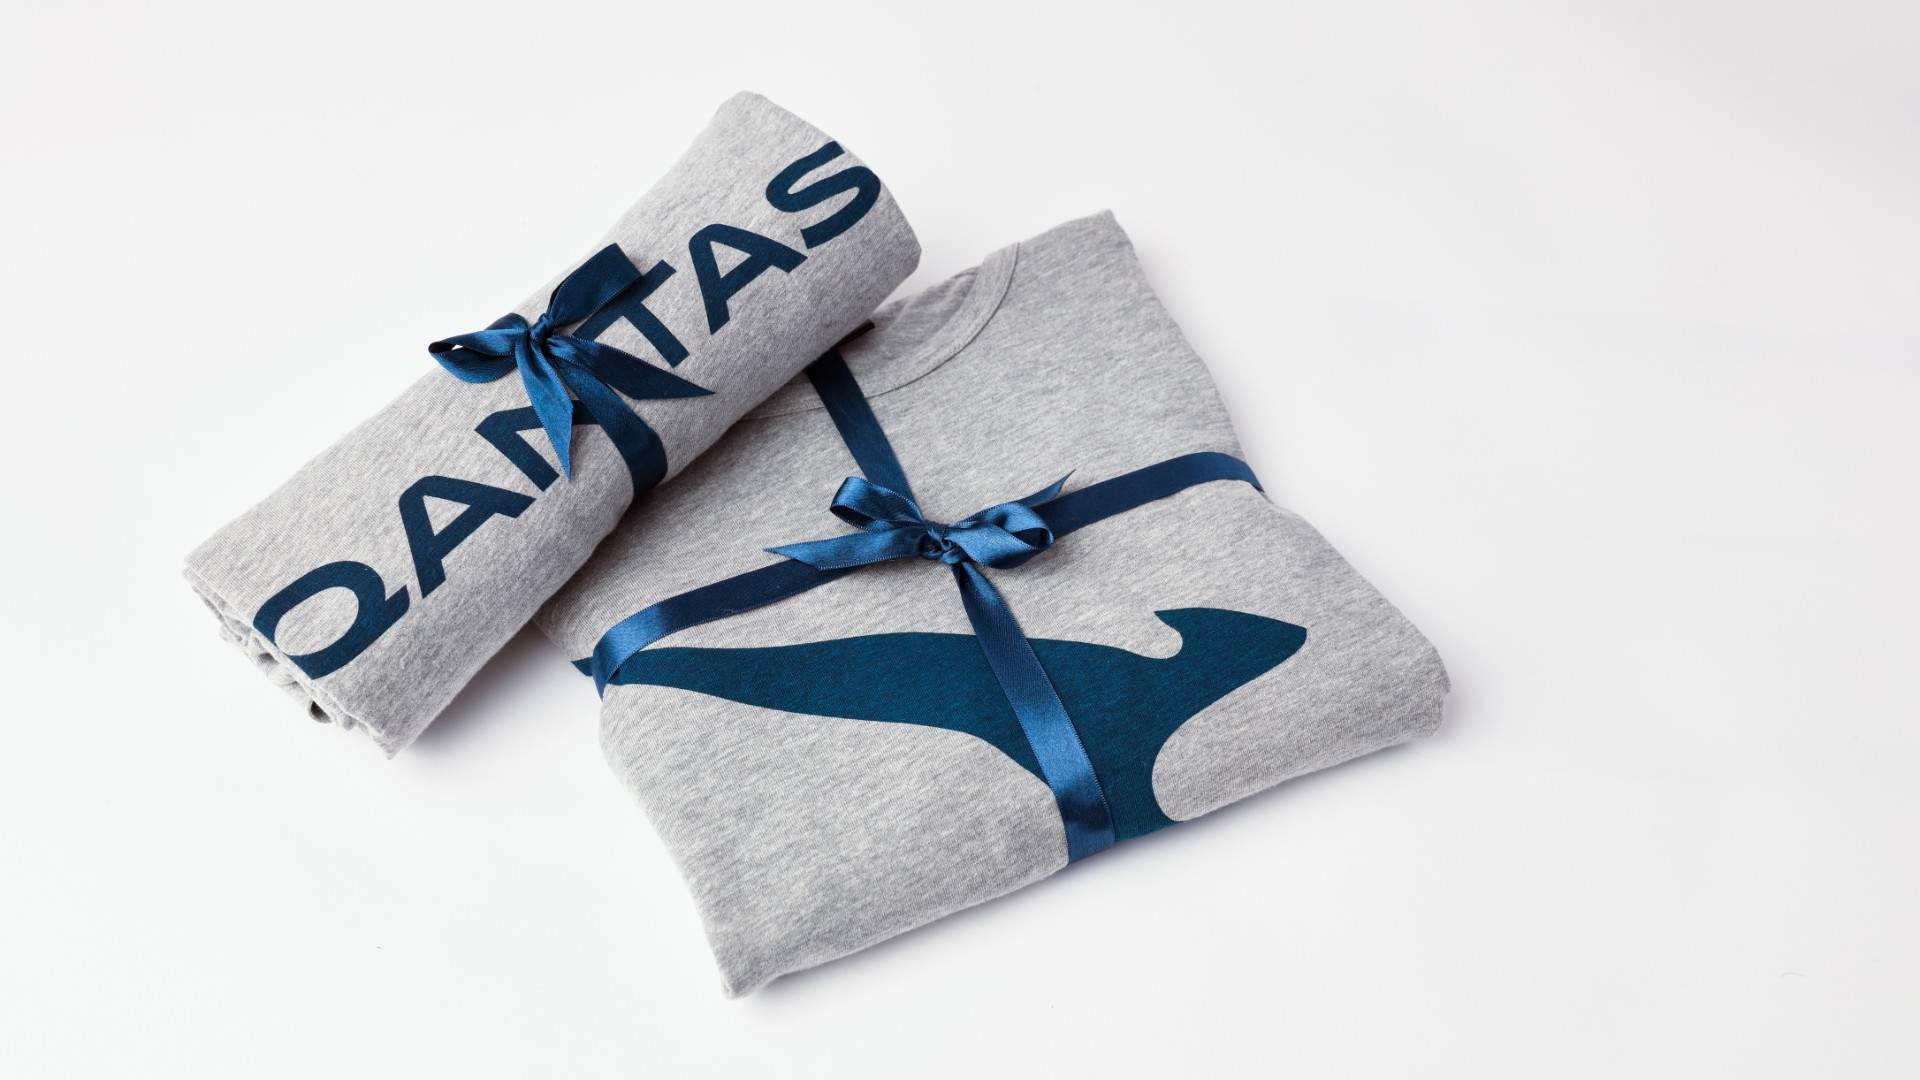 Qantas Is Now Selling Its Coveted PJs If You Want to Pretend You're Living It Up in Business Class